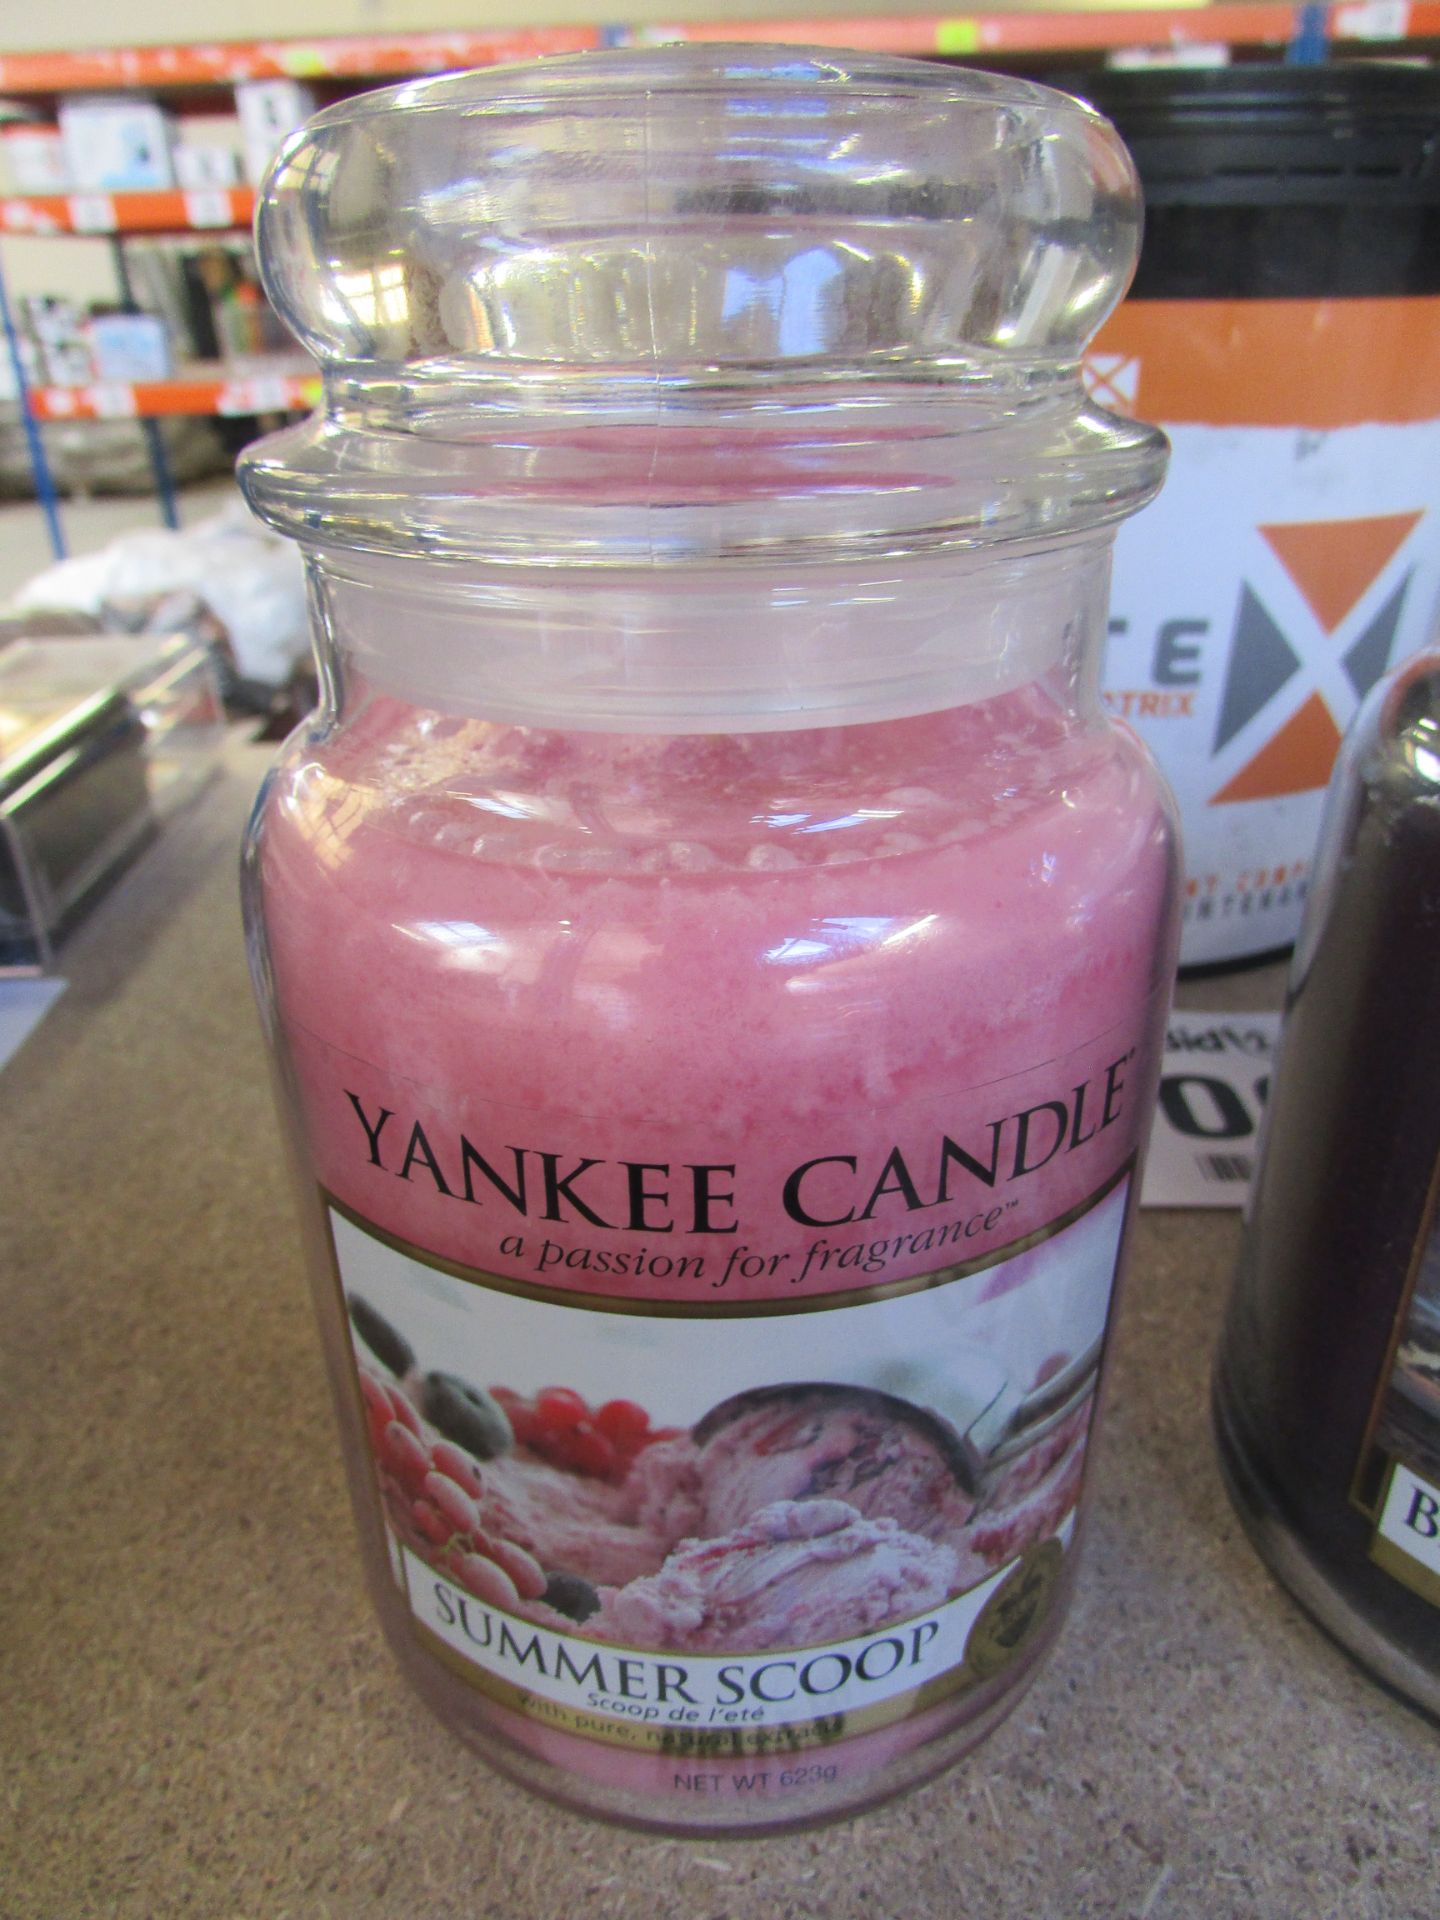 Yankee Candle Summer Scoop 623g